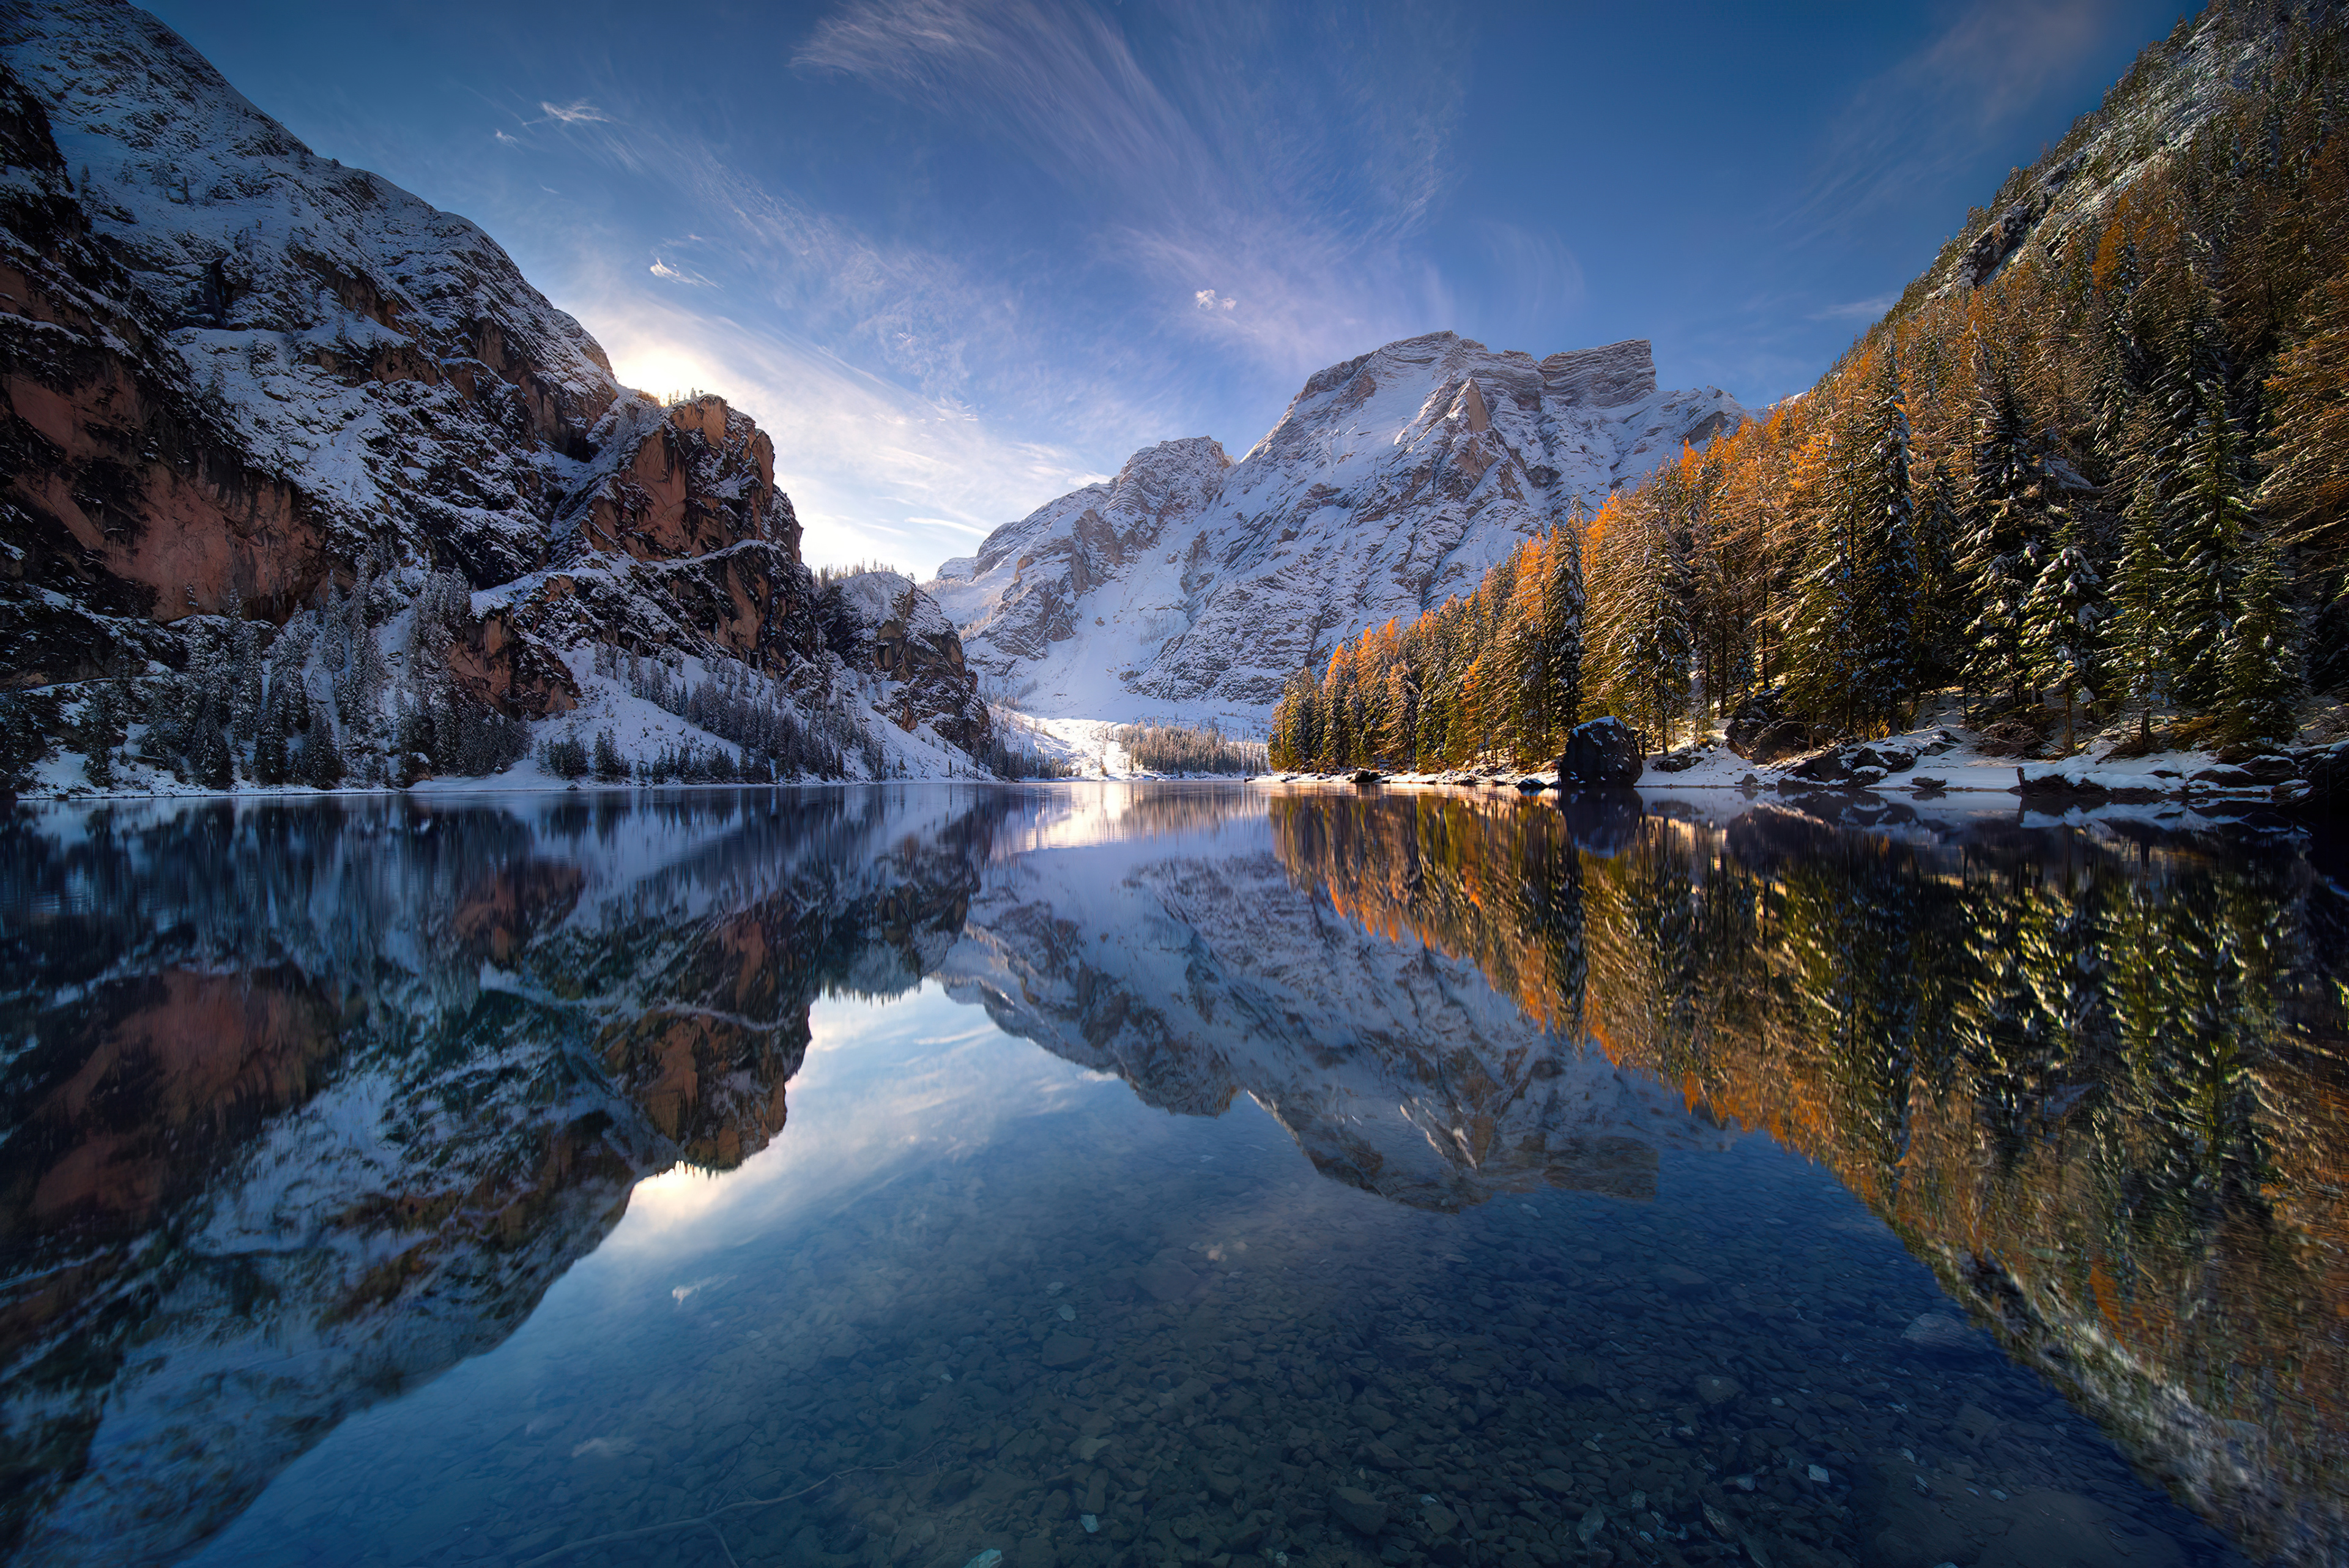 The morning lake reflects the mountain landscape